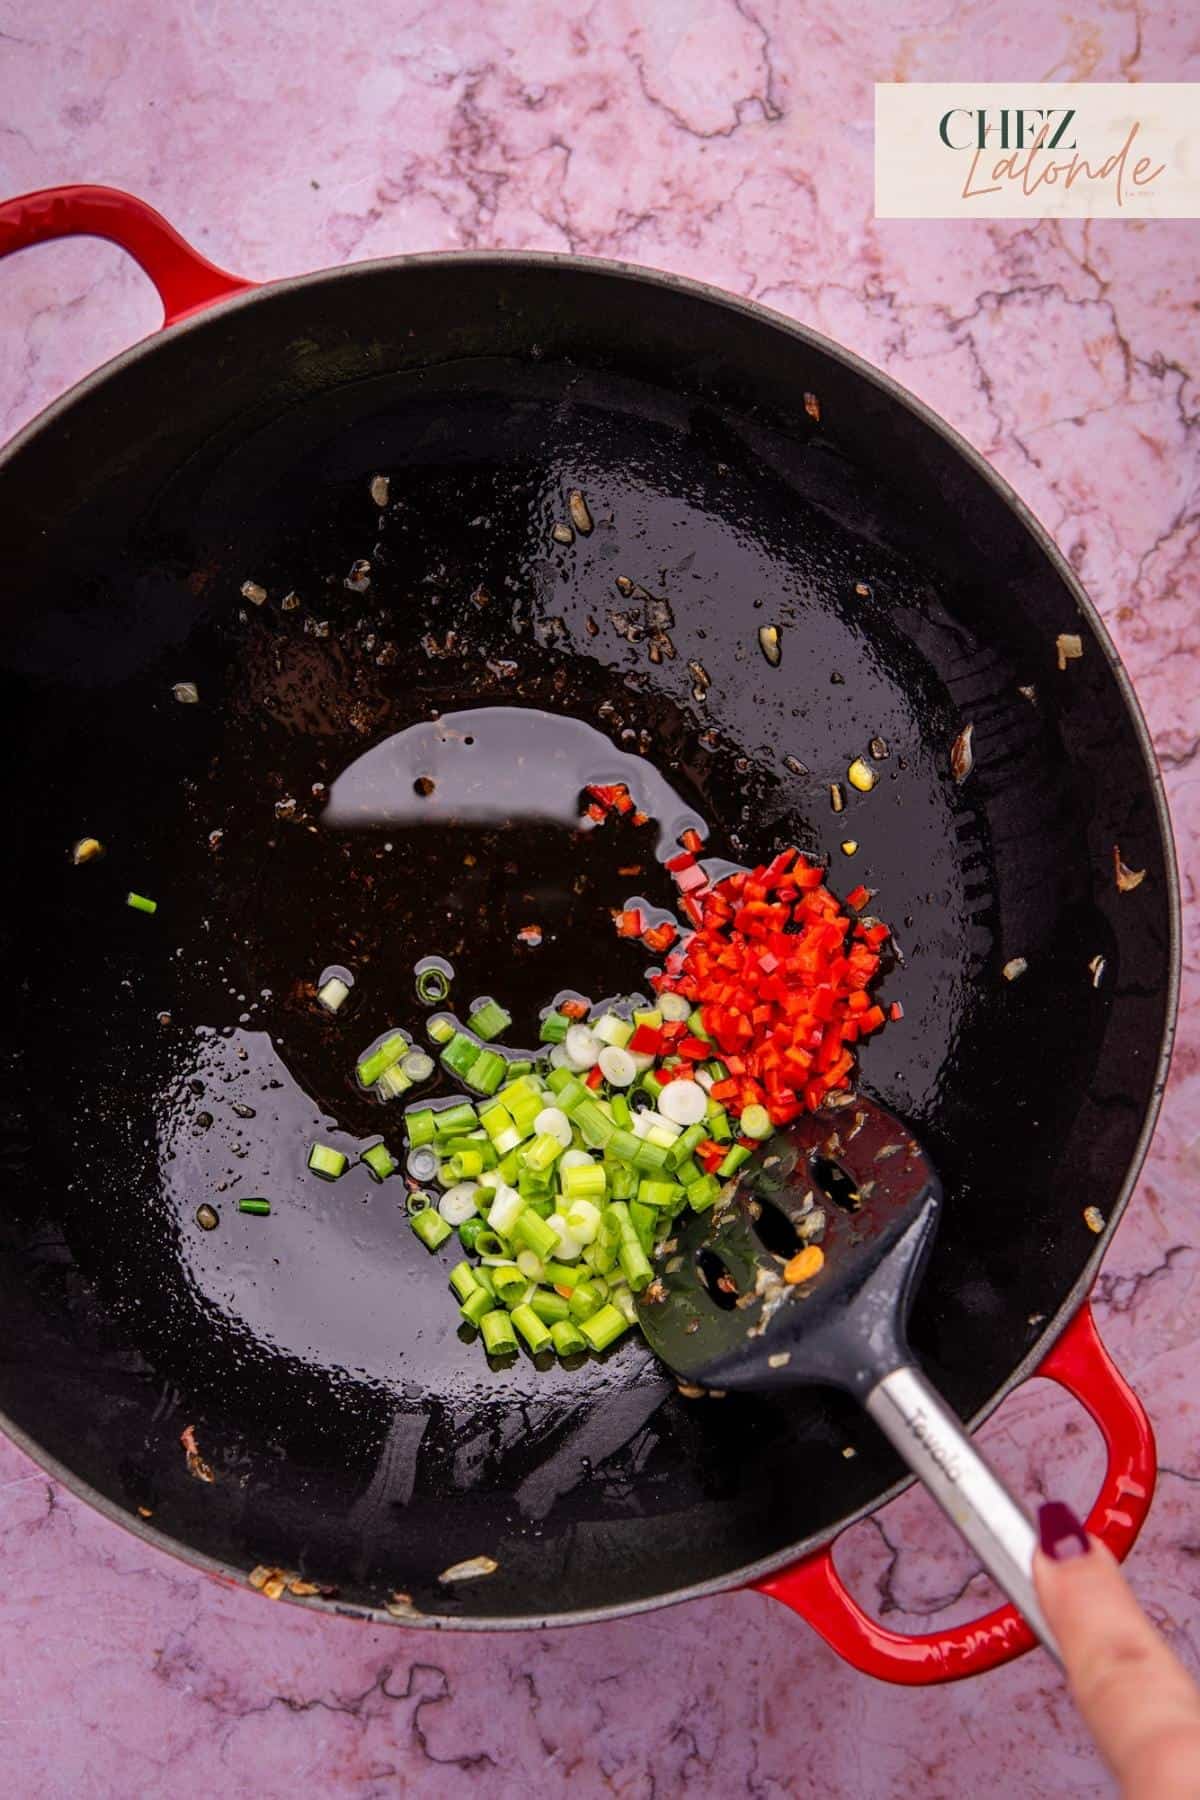 In the wok, add 4 tablespoons of avocado oil. Sauté chopped green onion and Fresno red pepper for 30 seconds or until fragrant. 